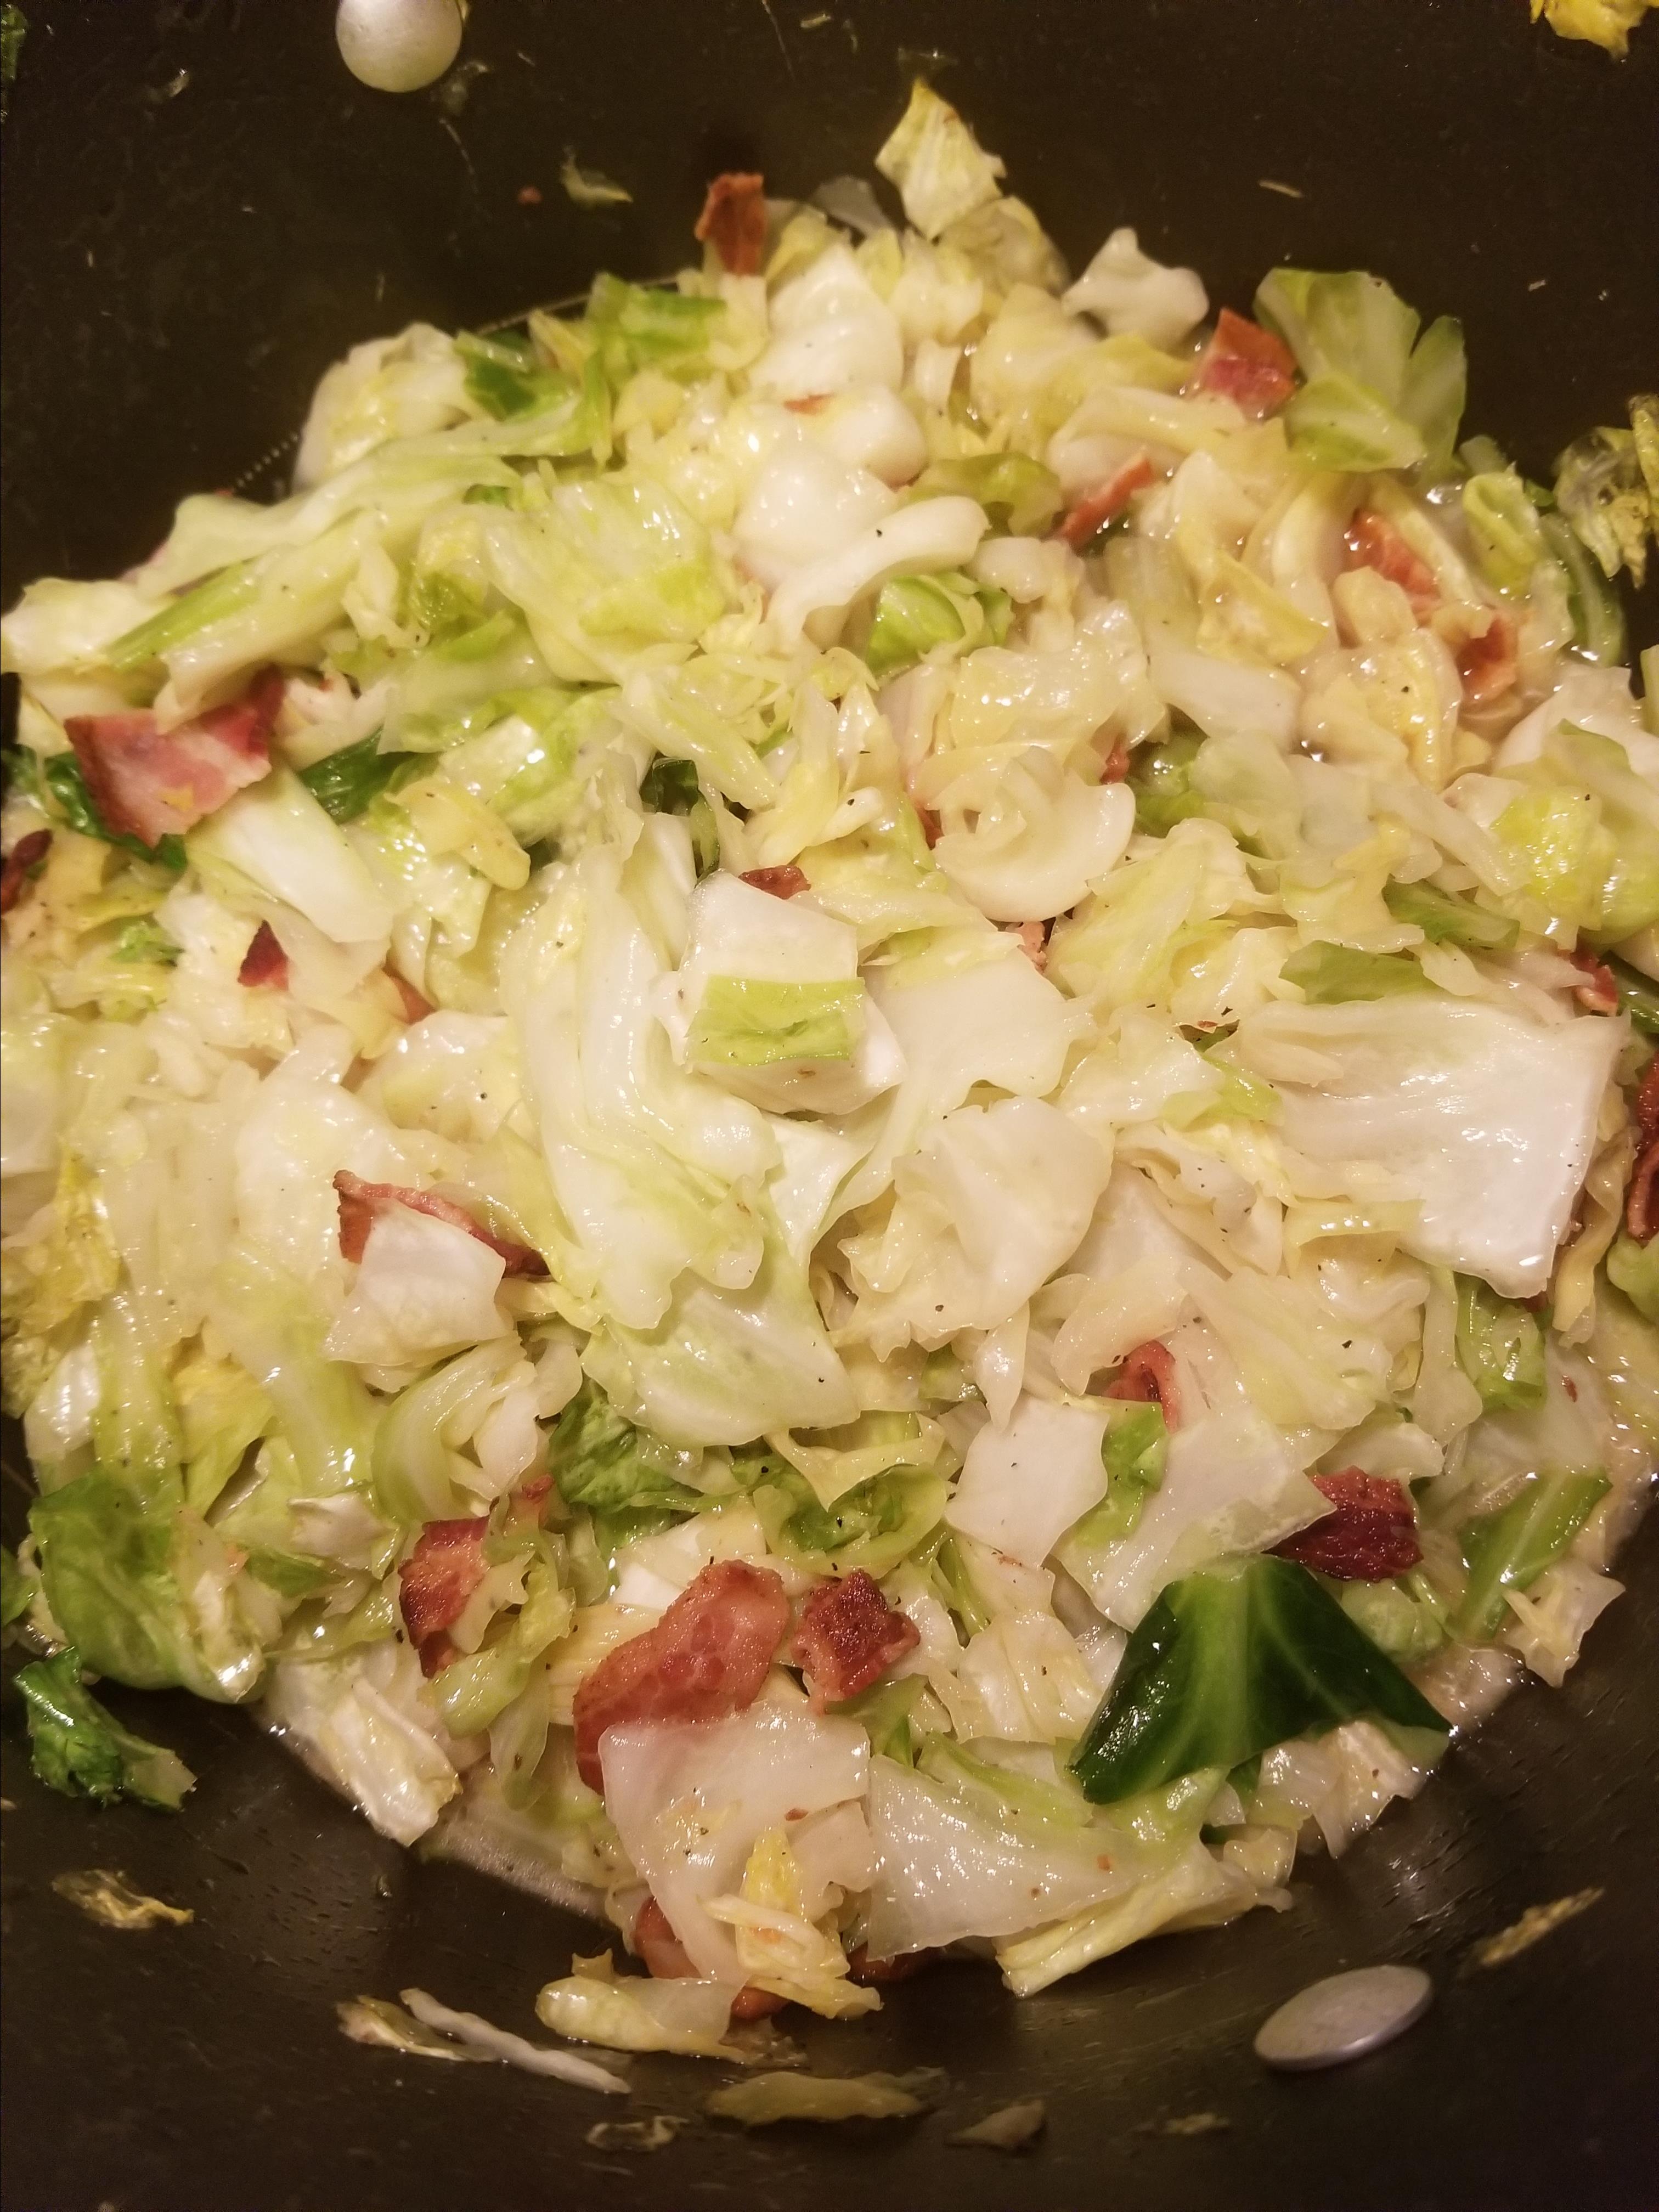 Southern Fried Cabbage Recipe Allrecipes,Authentic Mexican Sauces